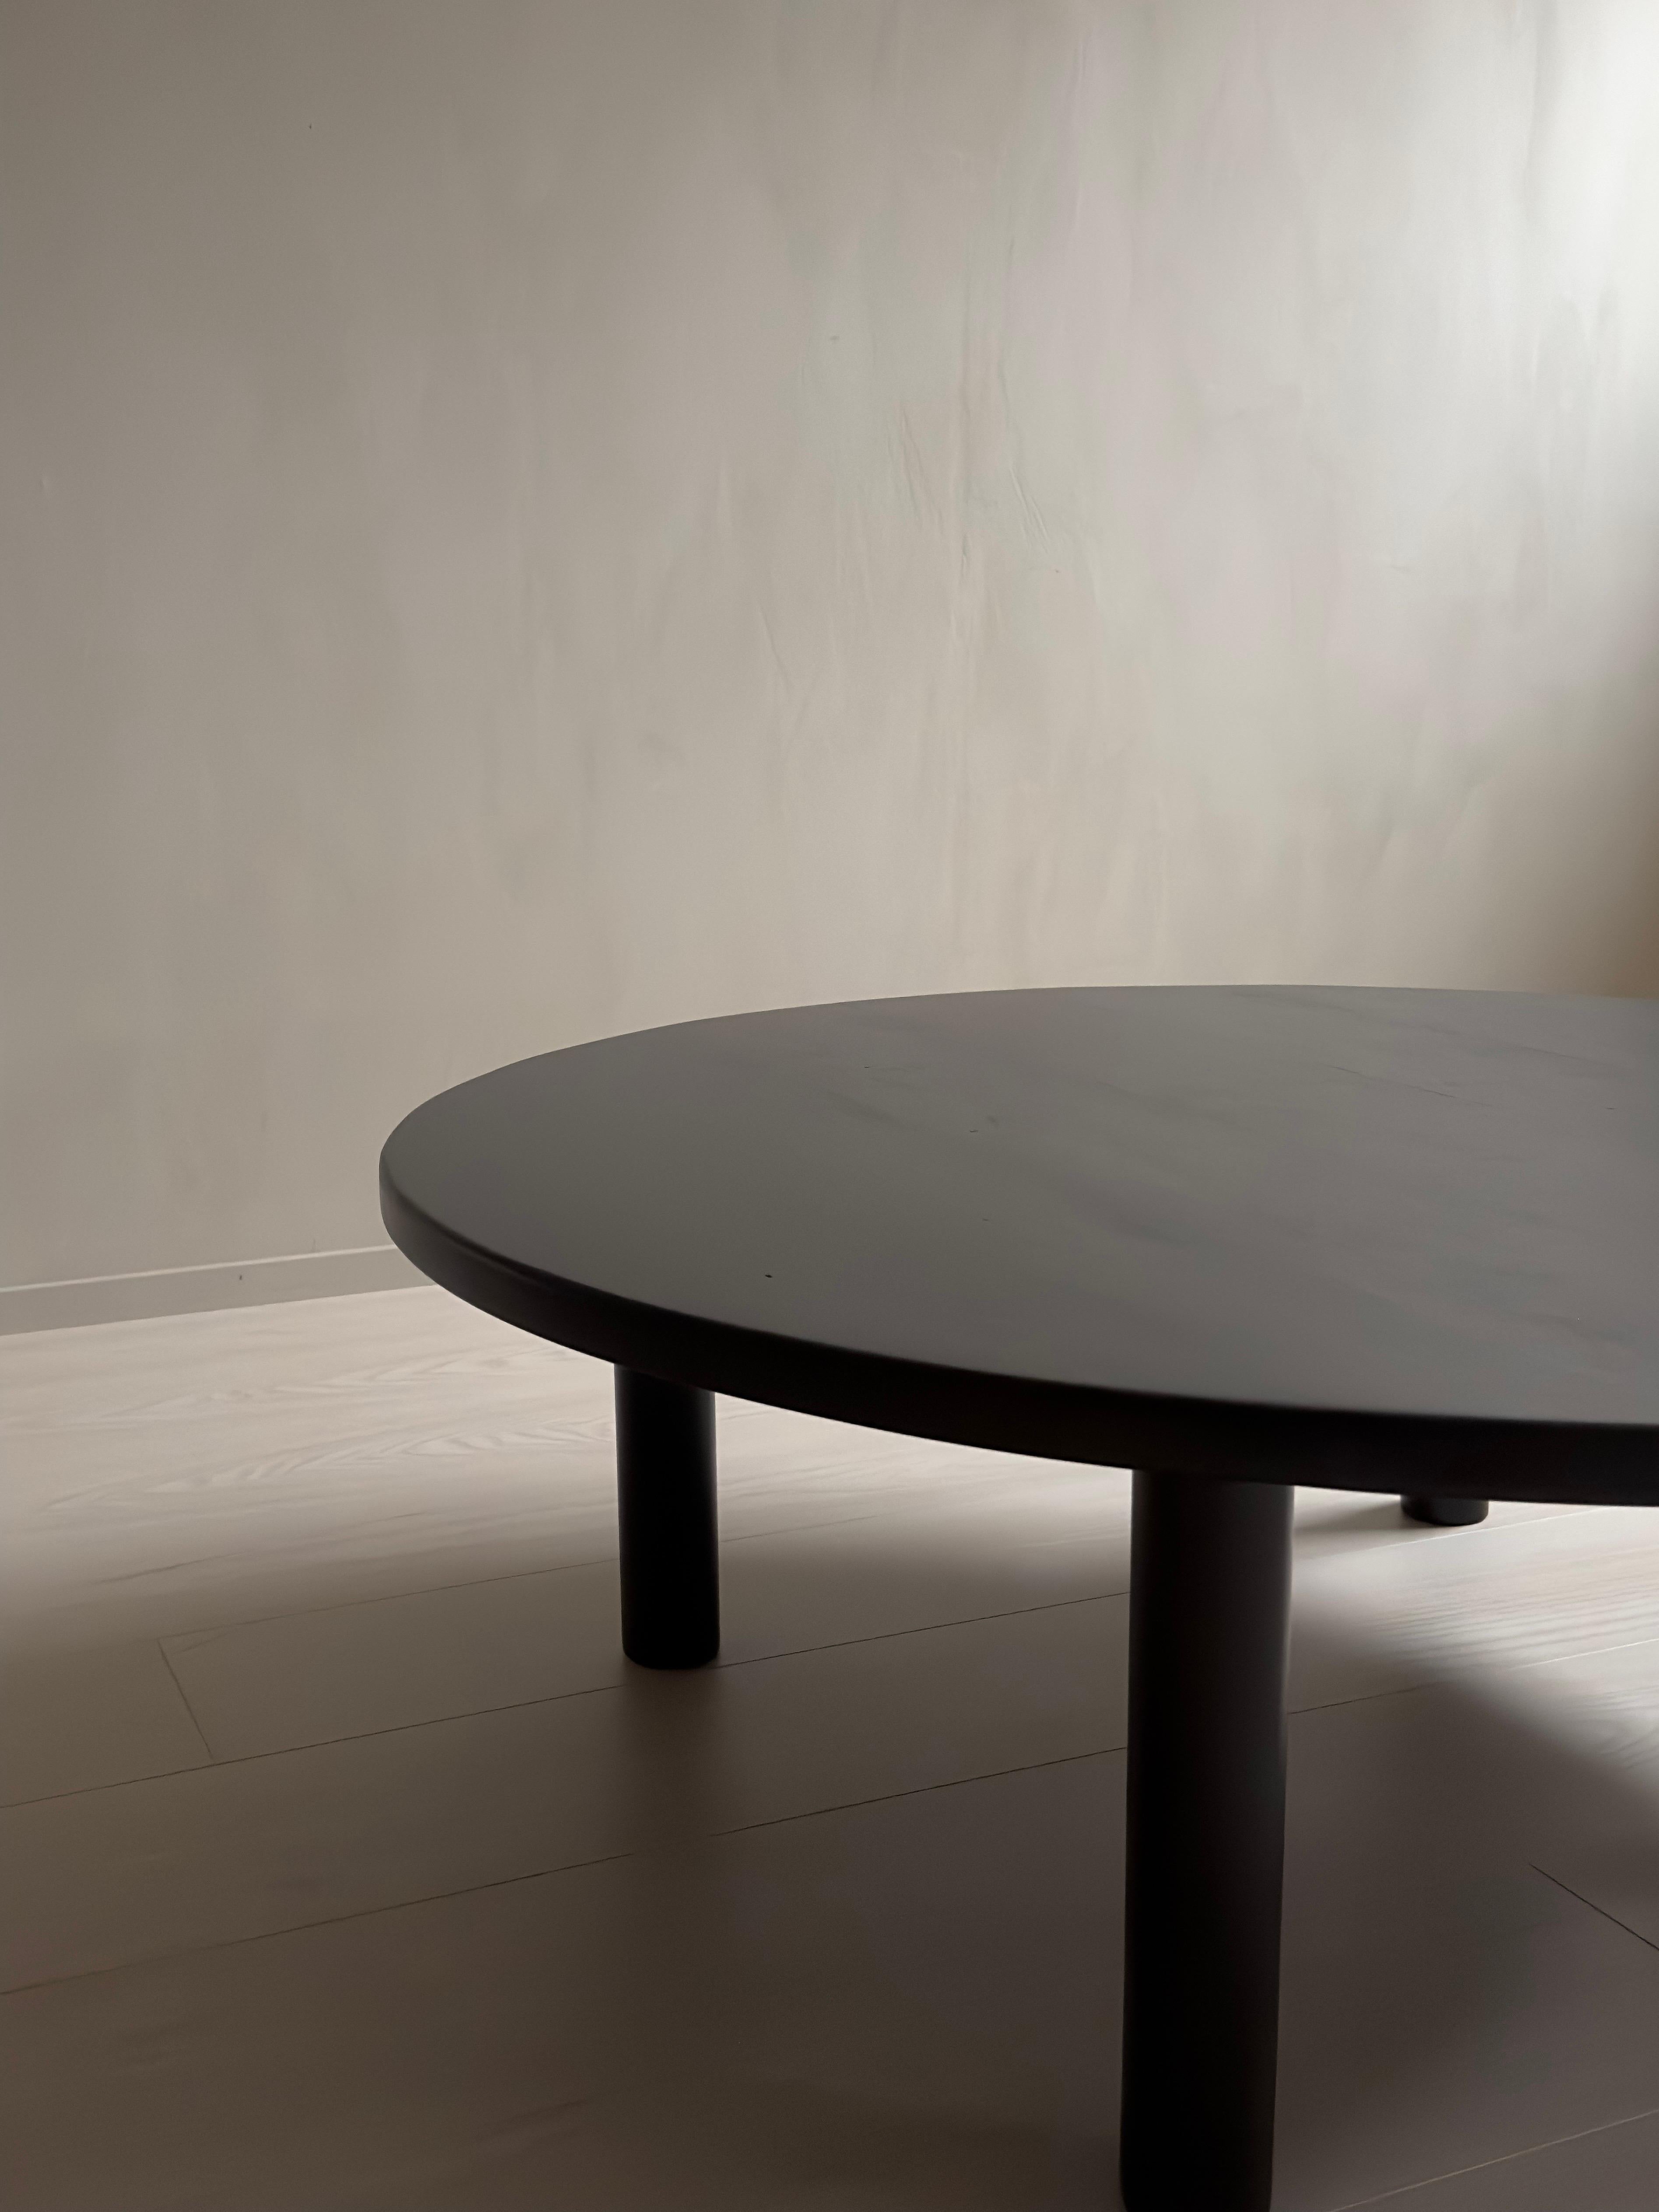 20th Century Mid-Century Ebonized Coffee Table in the Manner of Charlotte Perriand, C. 1960s For Sale